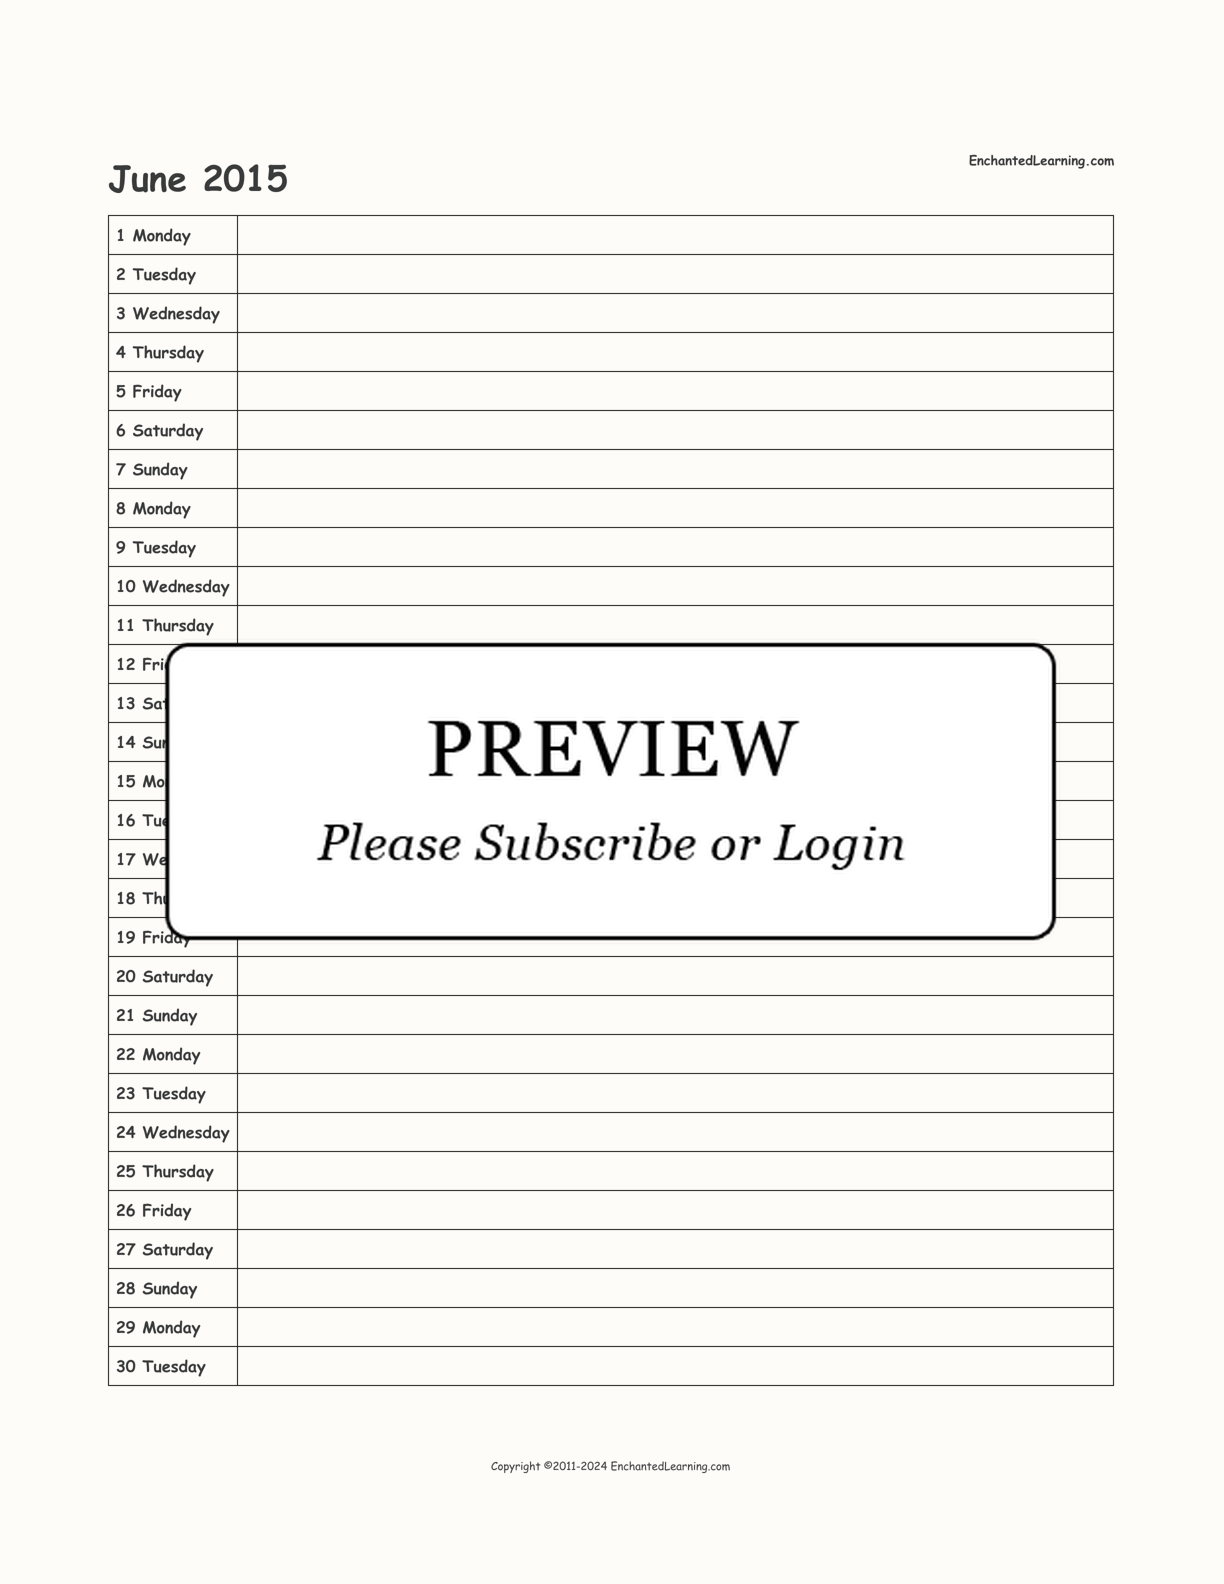 2015 Scheduling Calendar interactive printout page 6